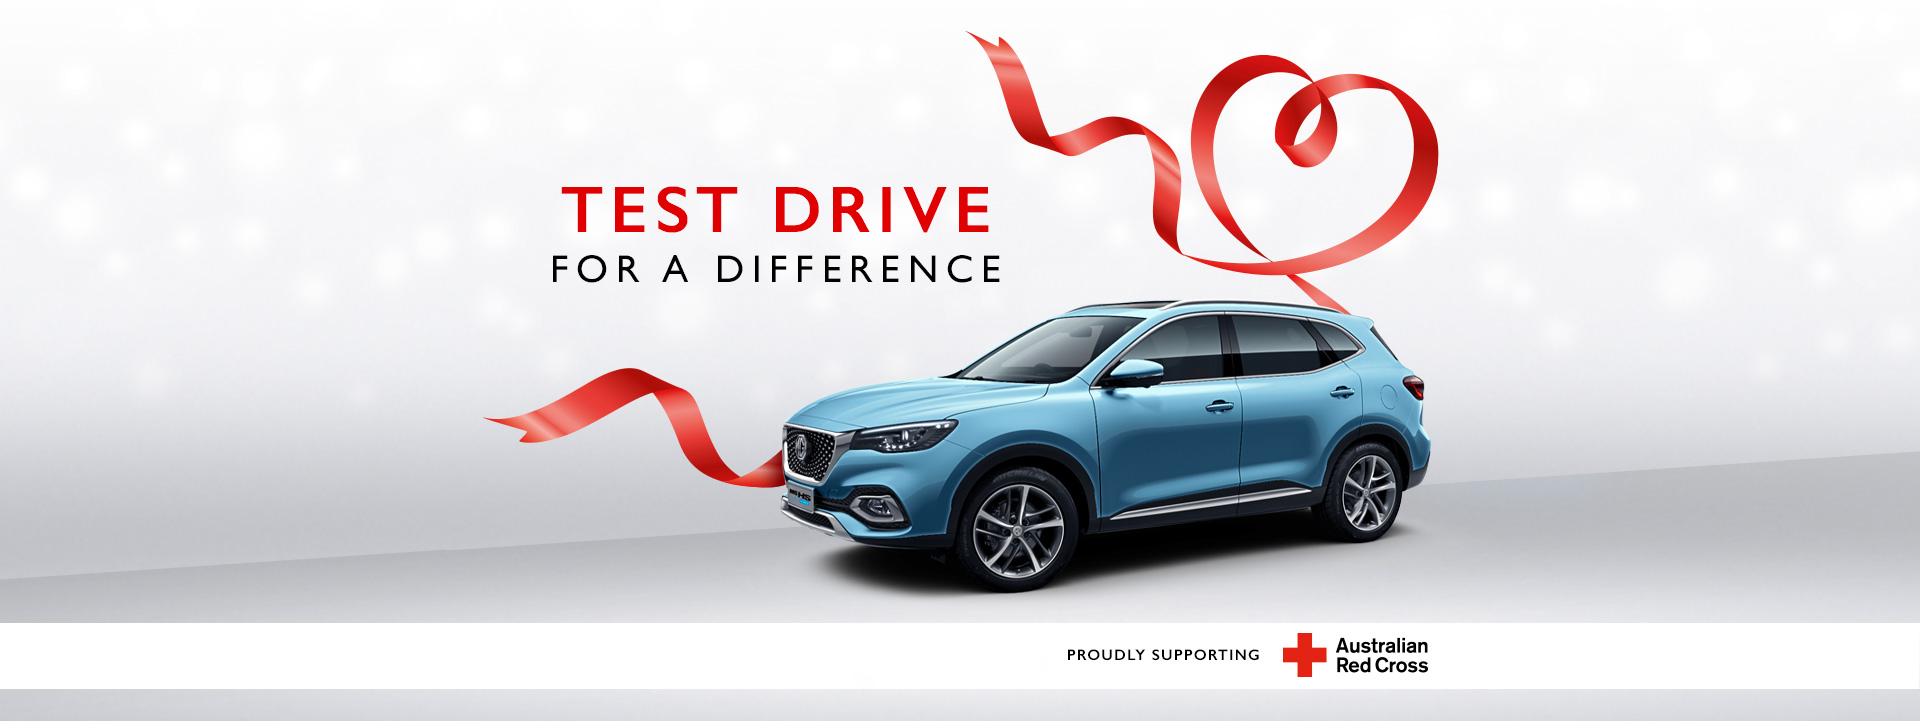 MG and Australian Red Cross support Test Drive For A Difference